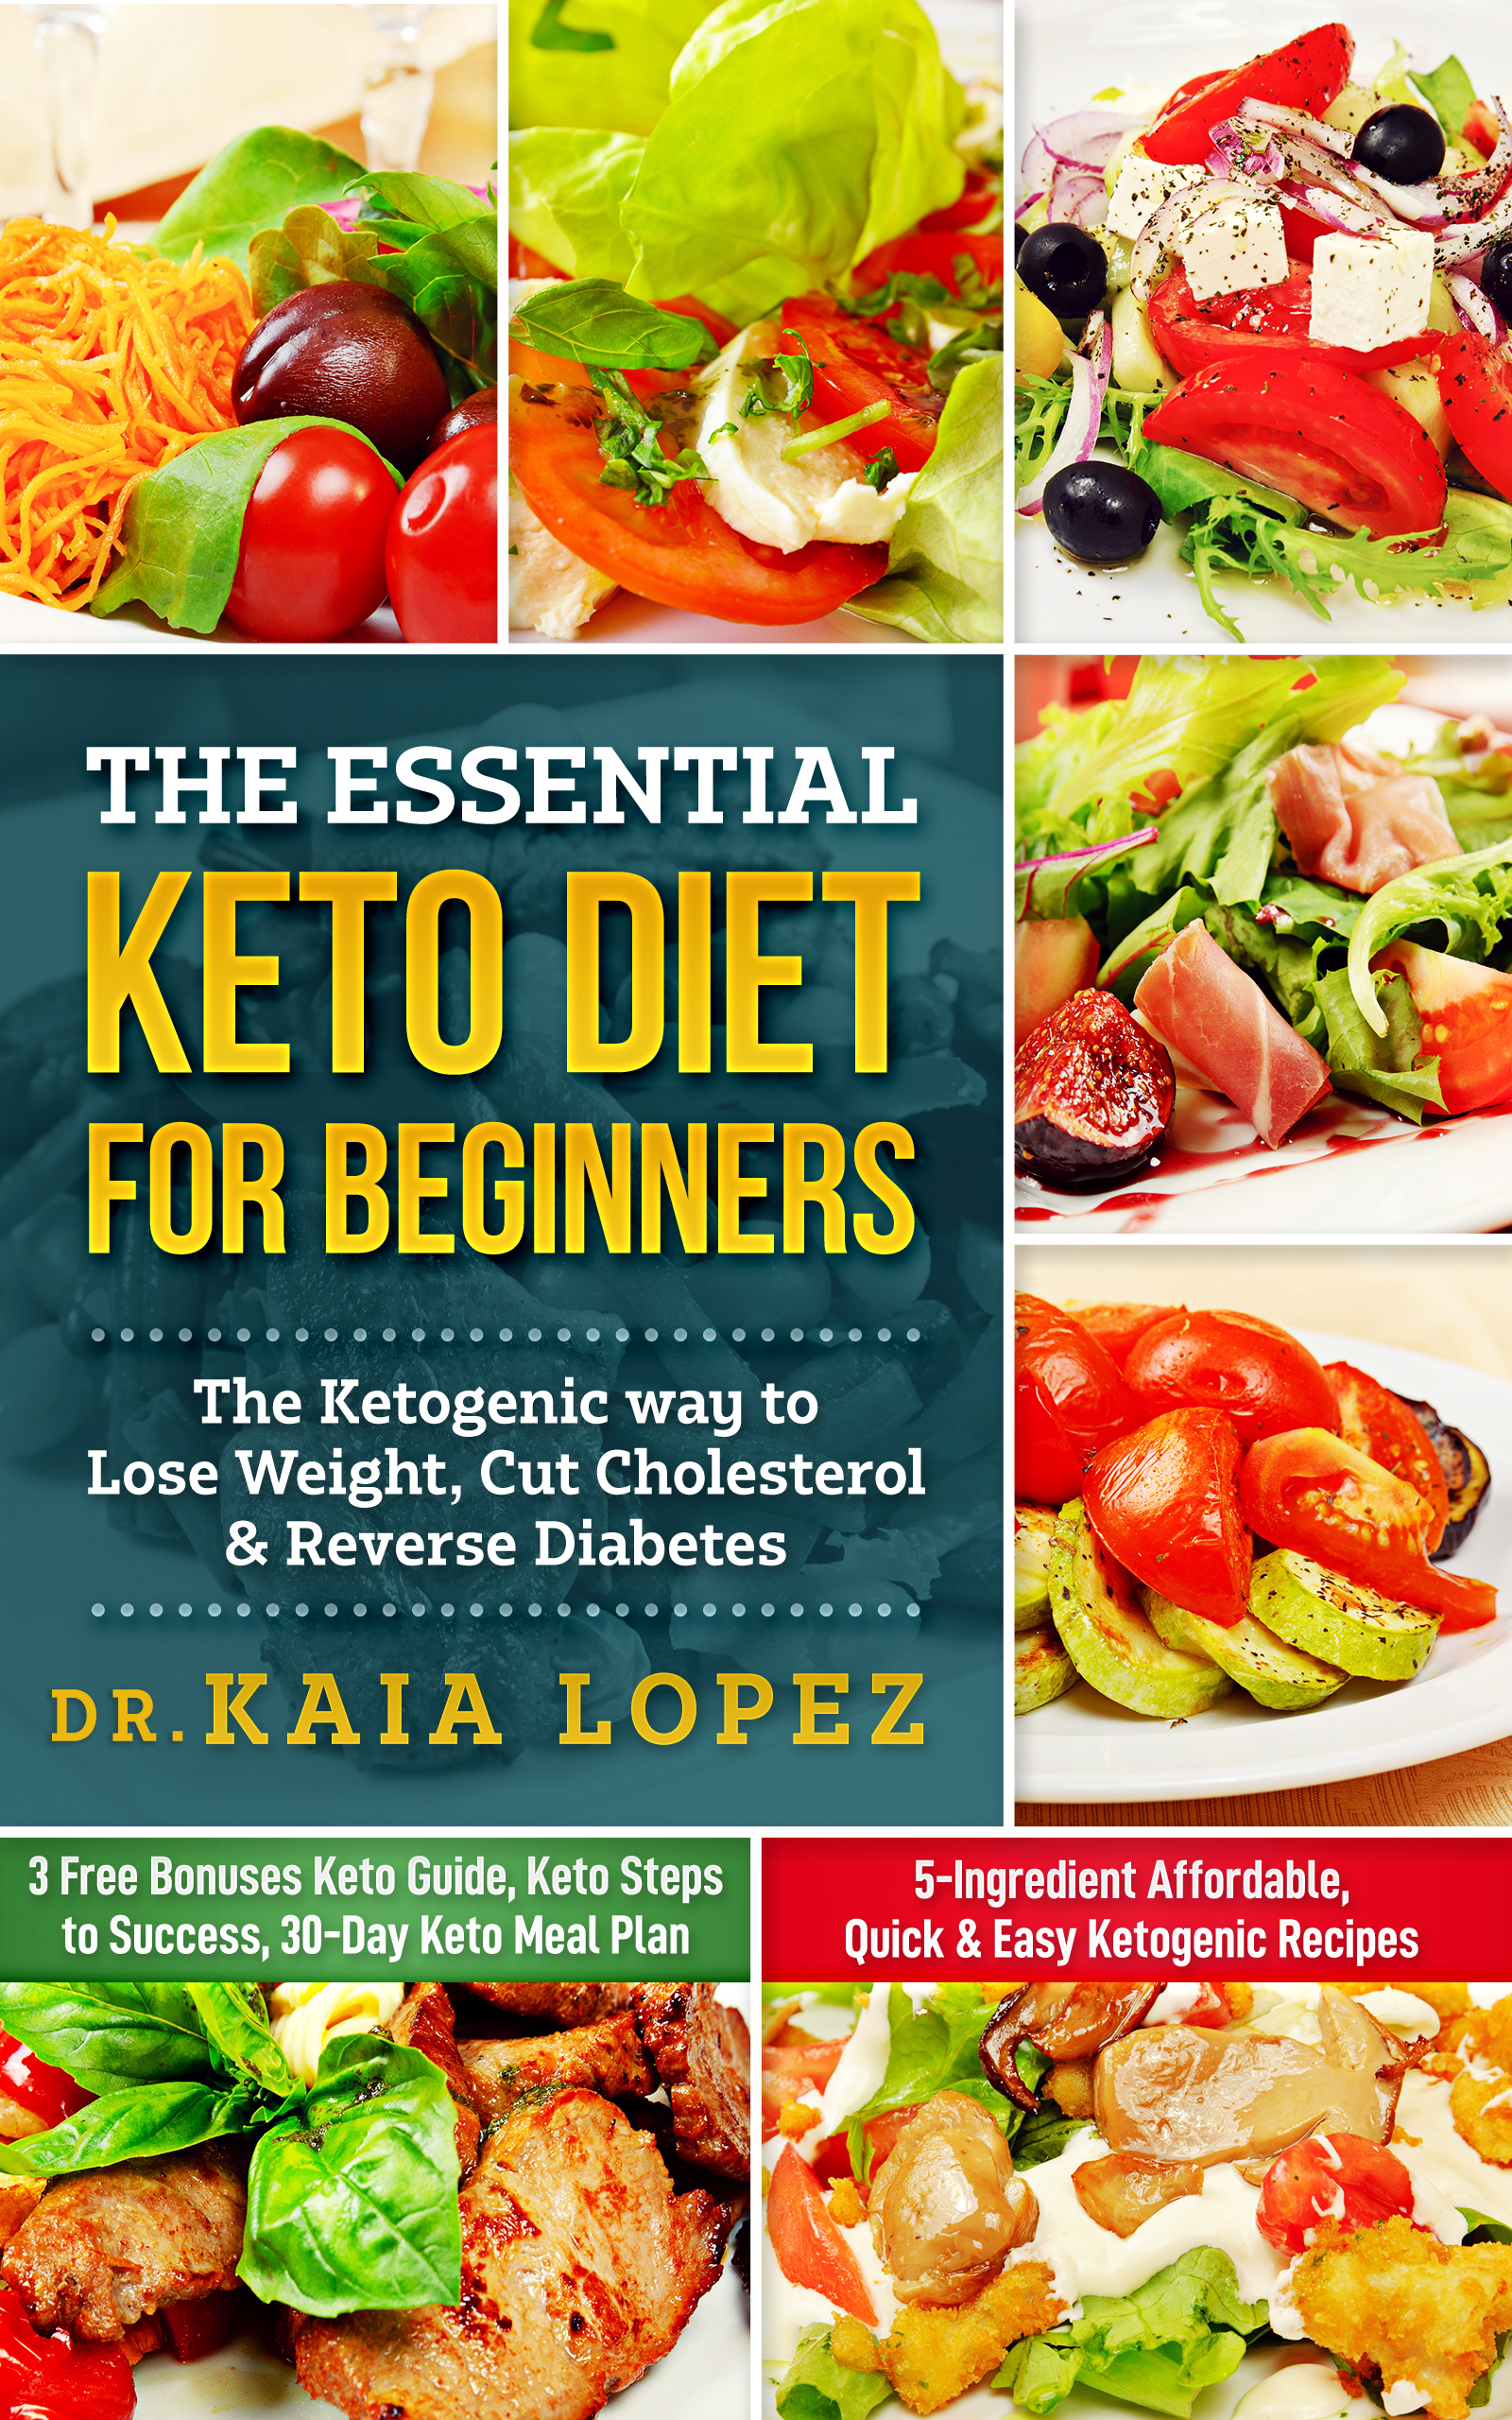 FREE: The Essential Keto Diet for Beginners by Kaia Lopez